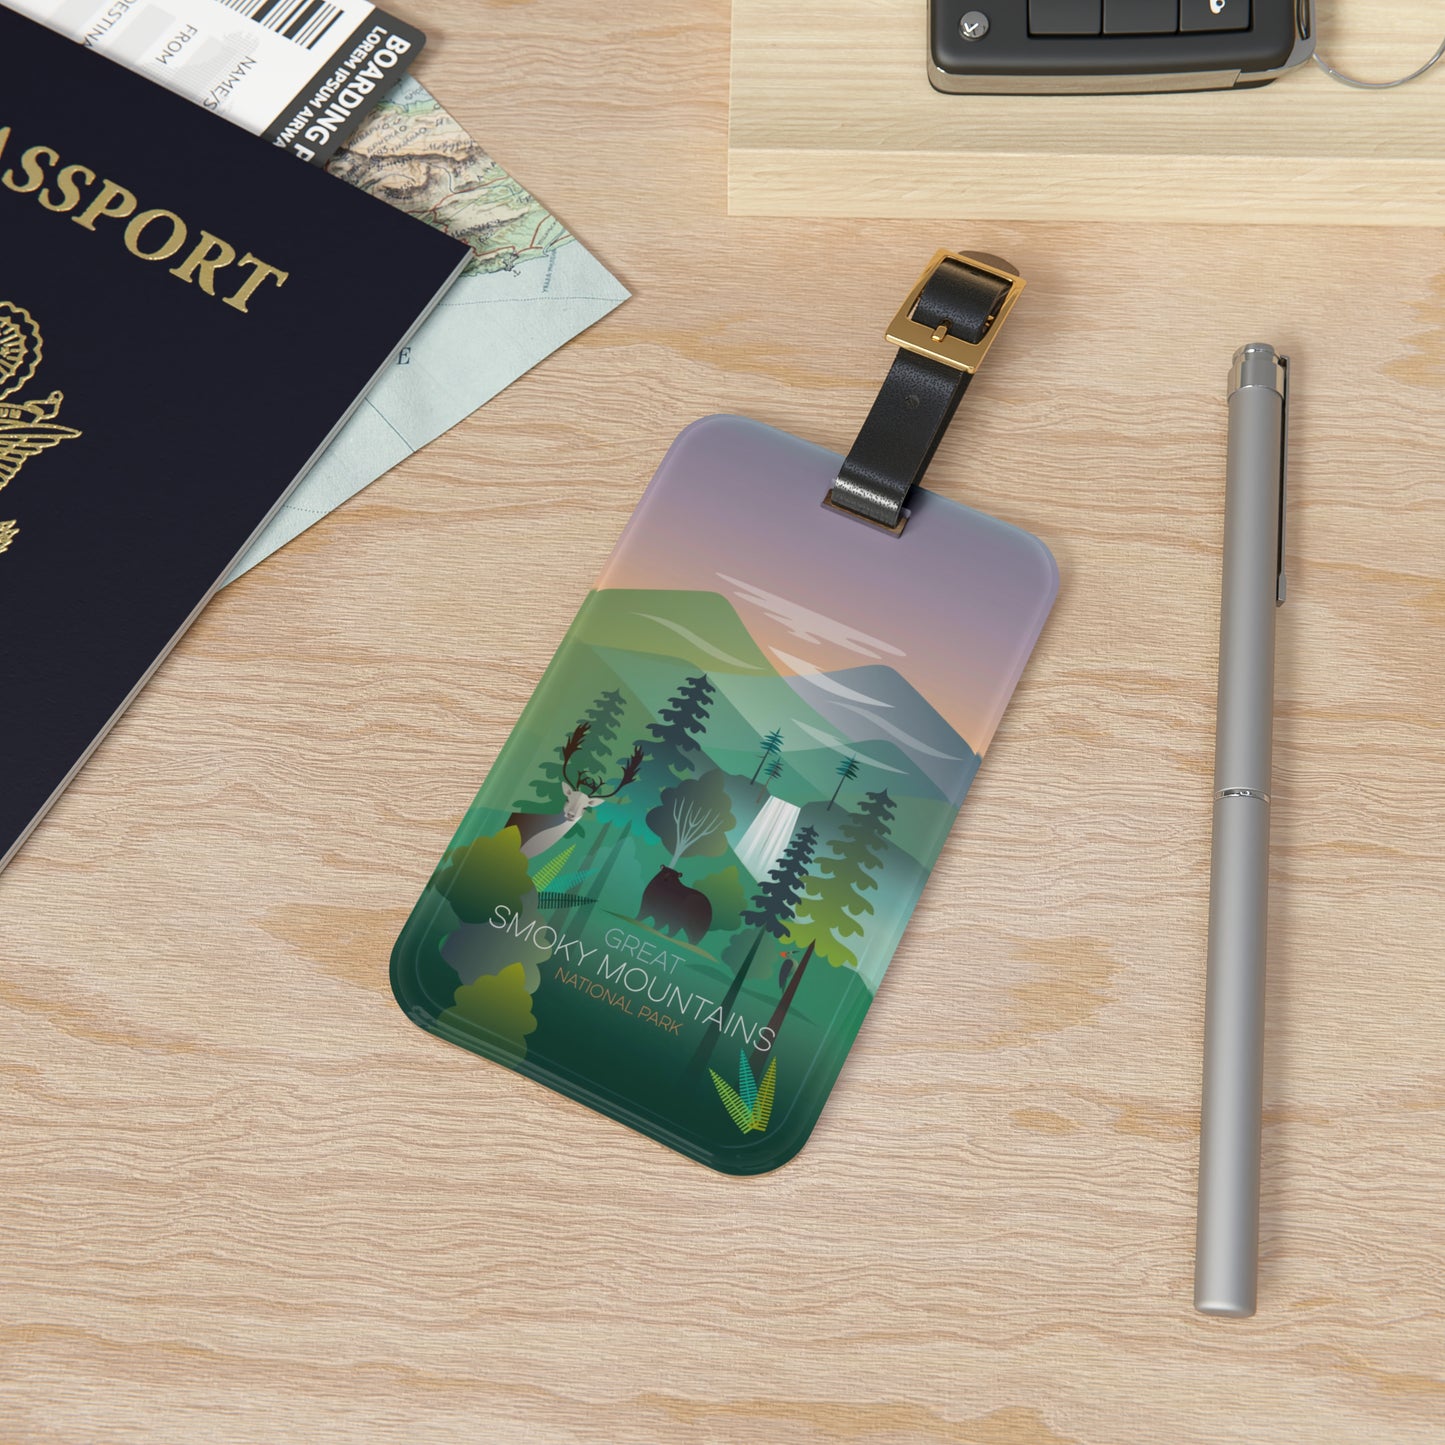 The Great Smoky Mountains Luggage Tag